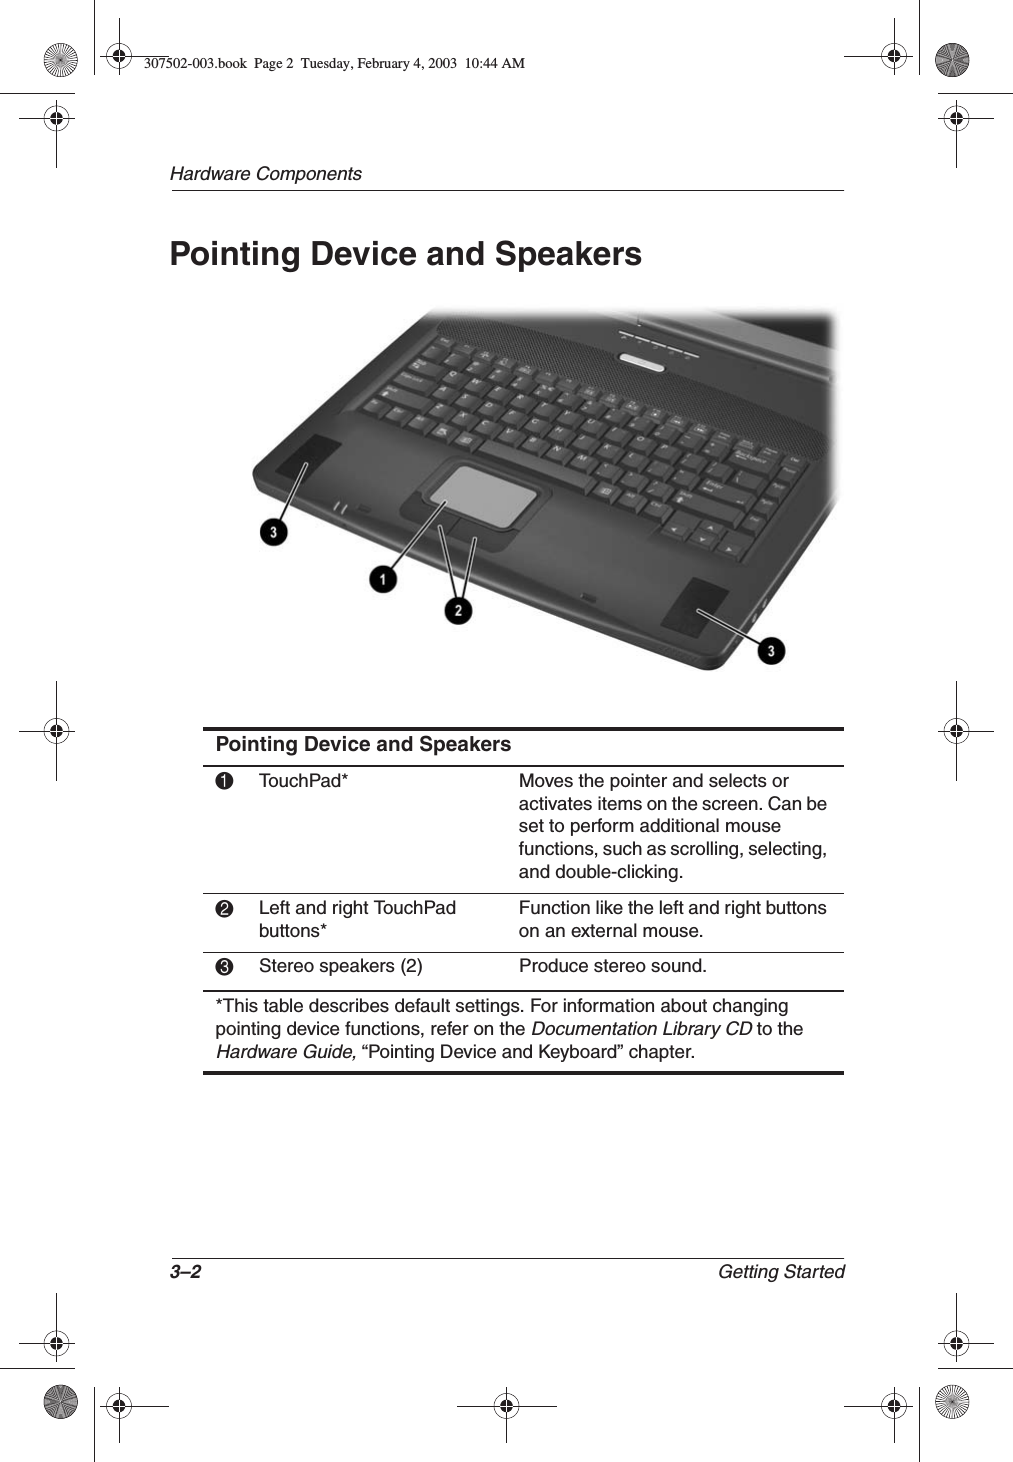 3–2 Getting StartedHardware ComponentsPointing Device and SpeakersPointing Device and Speakers1TouchPad* Moves the pointer and selects or activates items on the screen. Can be set to perform additional mouse functions, such as scrolling, selecting, and double-clicking.2Left and right TouchPad buttons*Function like the left and right buttons on an external mouse.3Stereo speakers (2) Produce stereo sound.*This table describes default settings. For information about changing pointing device functions, refer on the Documentation Library CD to the Hardware Guide, “Pointing Device and Keyboard” chapter.307502-003.book  Page 2  Tuesday, February 4, 2003  10:44 AM